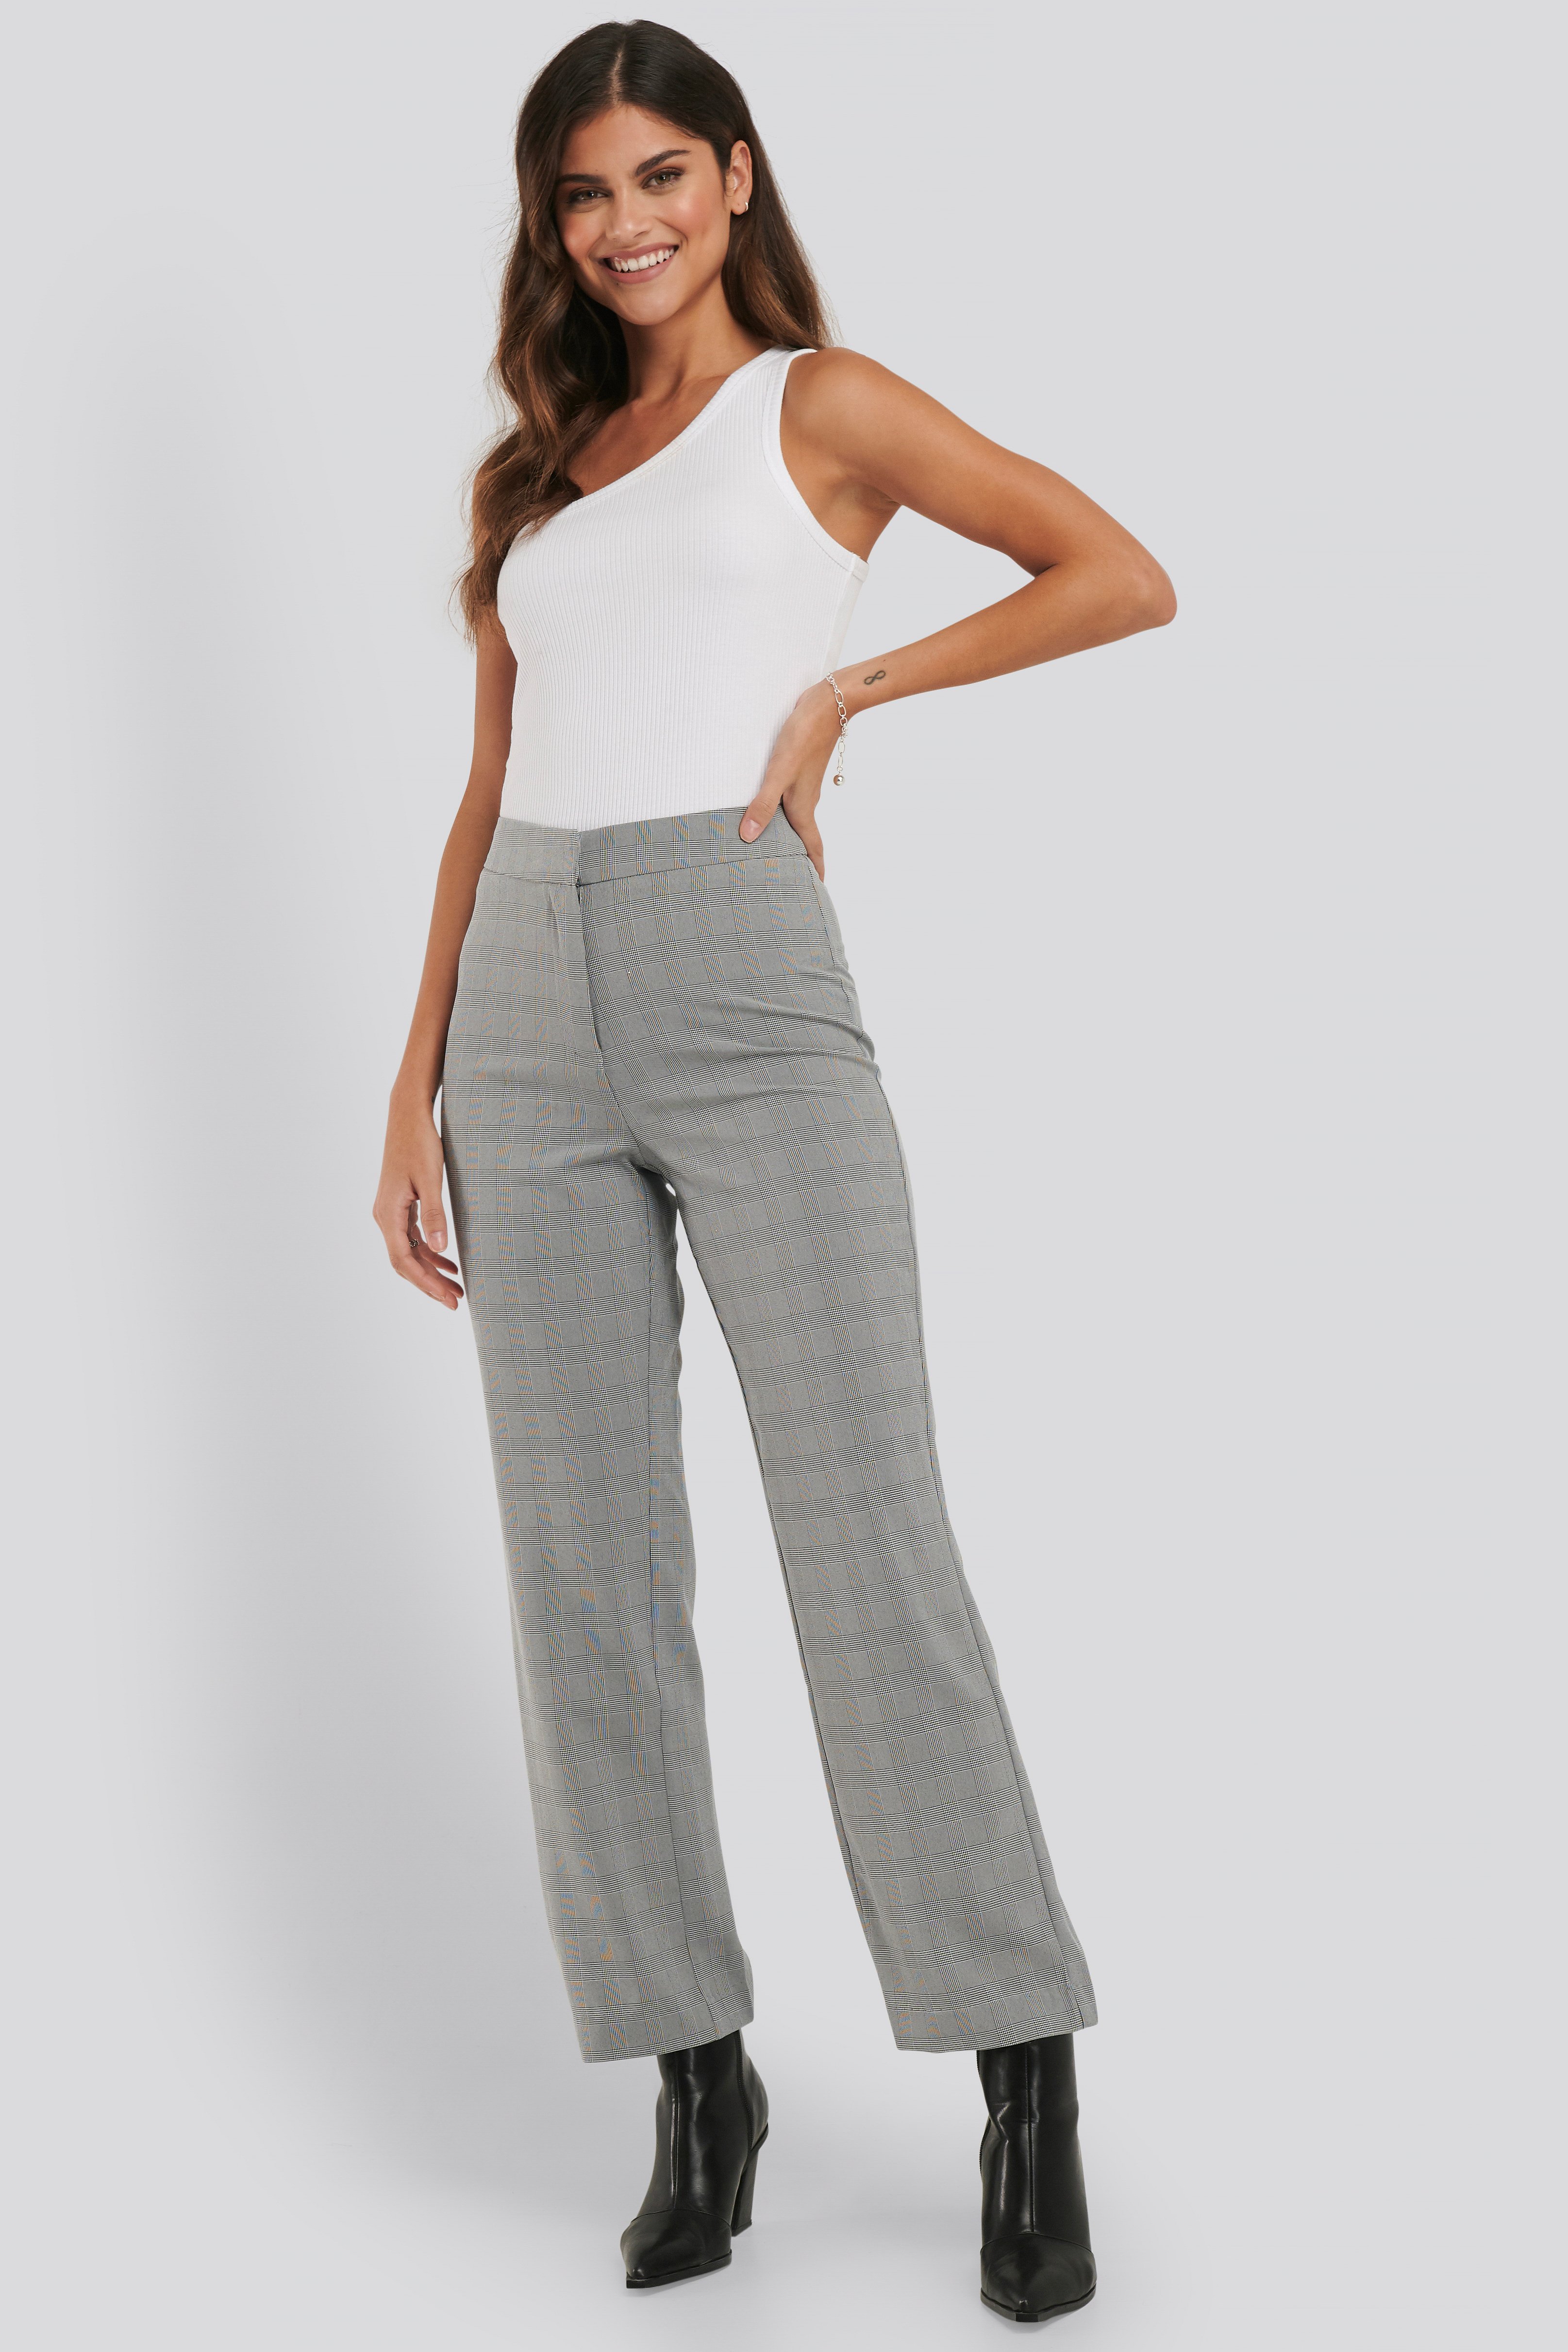 Grey Cropped Straight Suit Check Pants